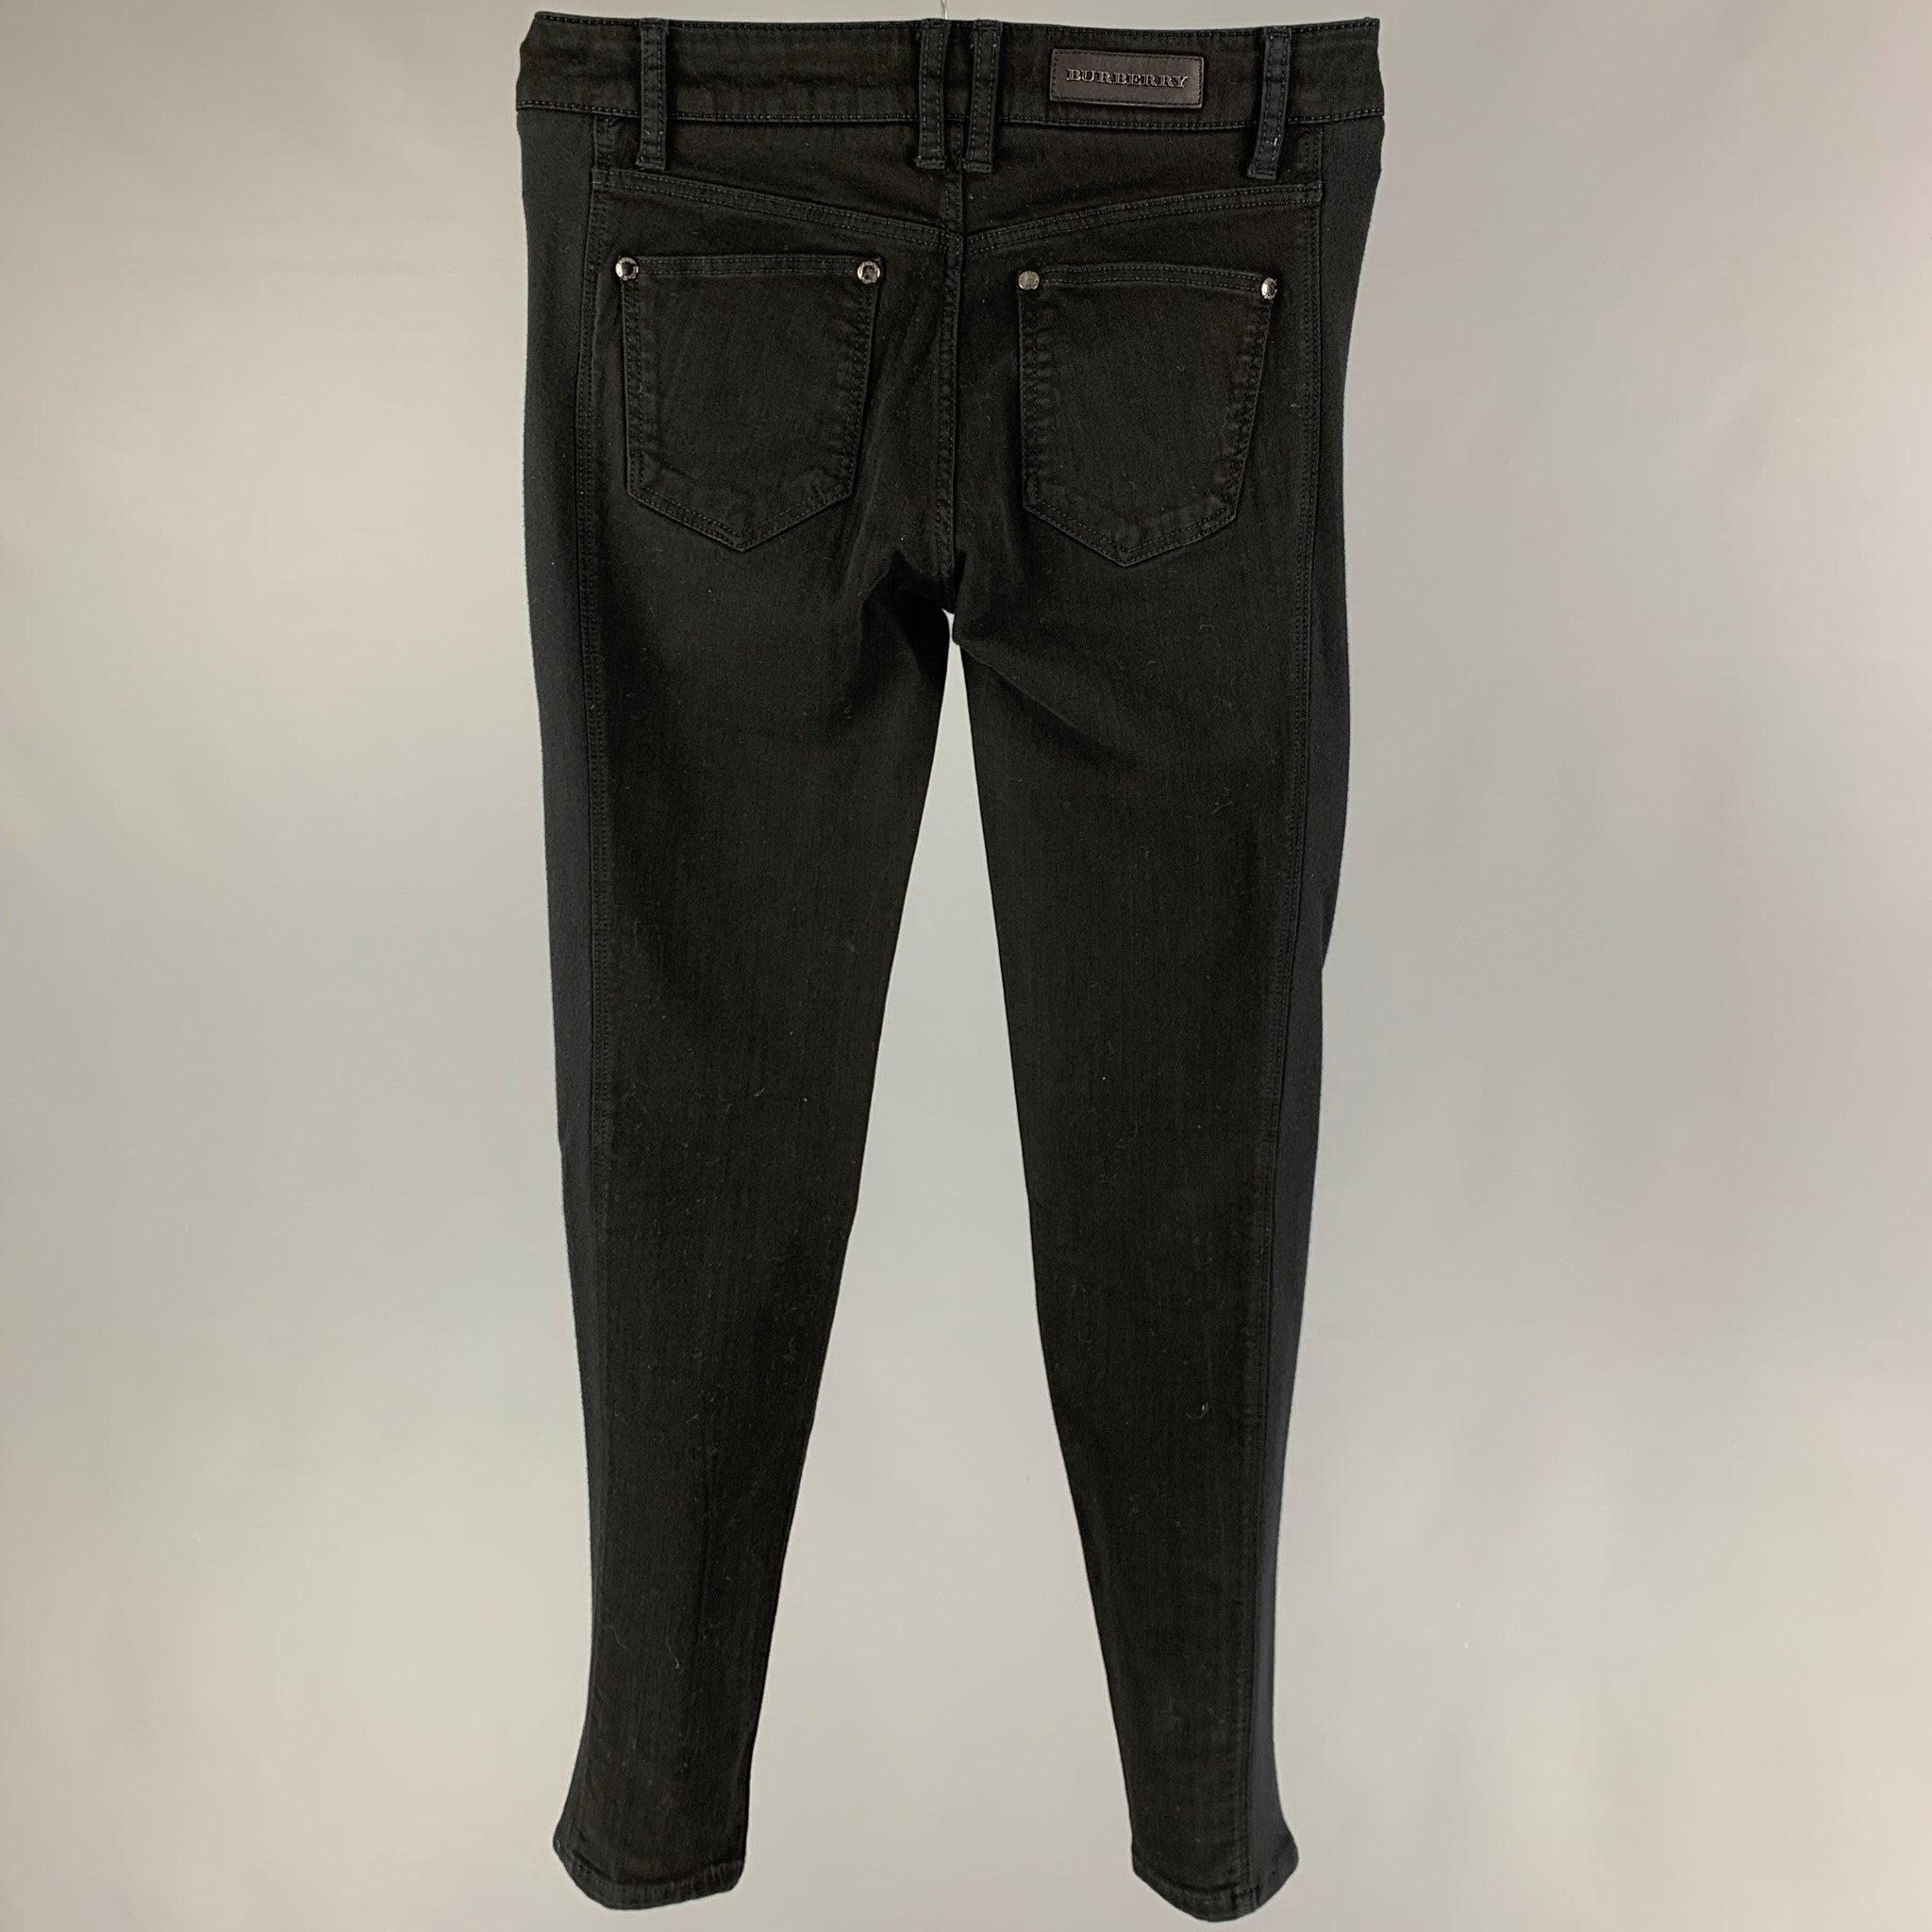 BURBERRY LONDON jeans comes in a black material featuring a skinny fit and a zip fly closure.
Very Good
Pre-Owned Condition. 

Marked:   29 

Measurements: 
  Waist: 29 inches  Rise: 9 inches  Inseam: 29 inches 
  
  
 
Reference: 119336
Category: